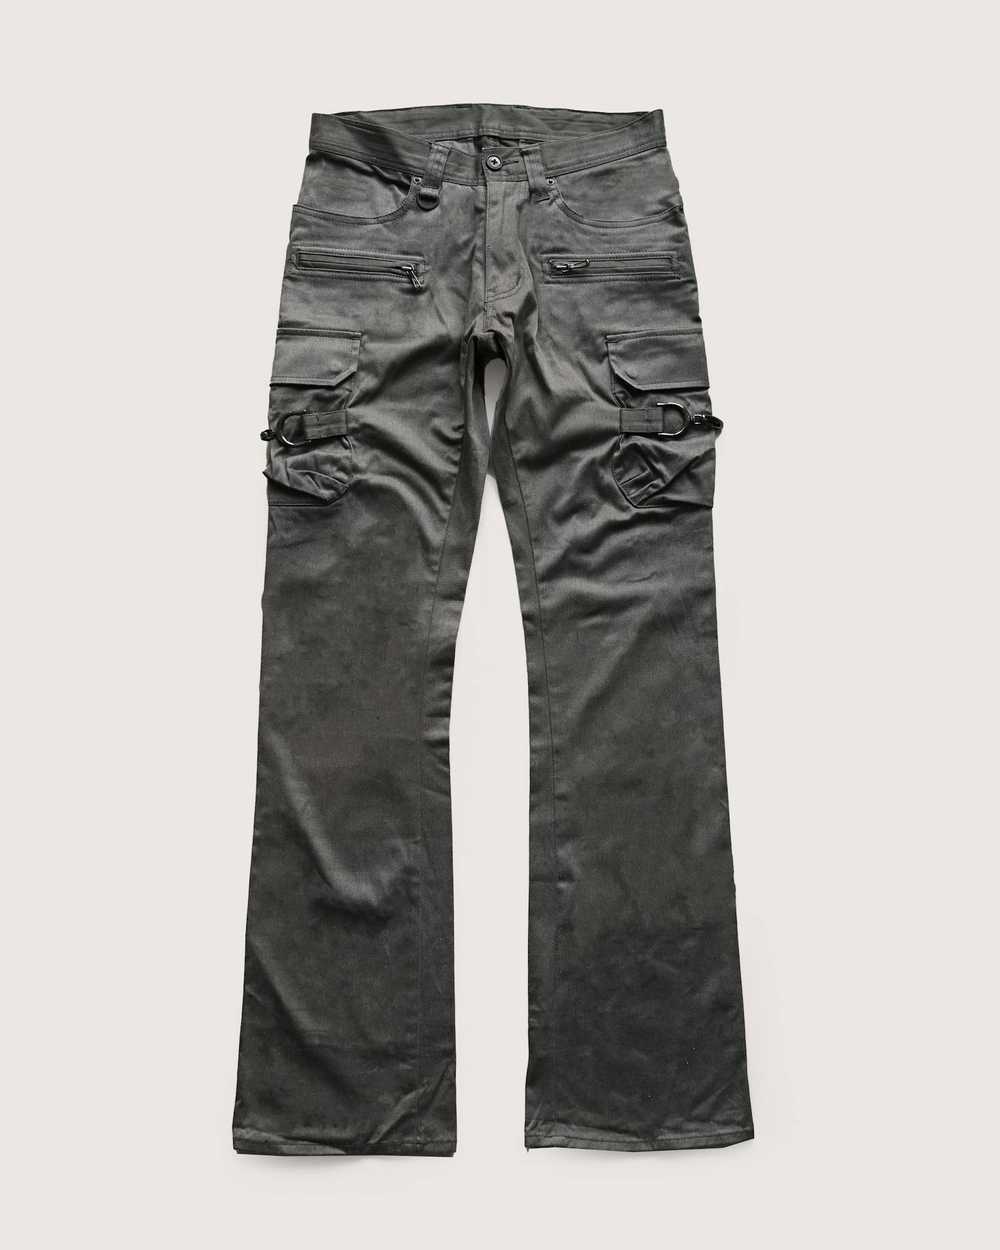 Tete Homme Tete Homme Military Style Flare Pants - image 1